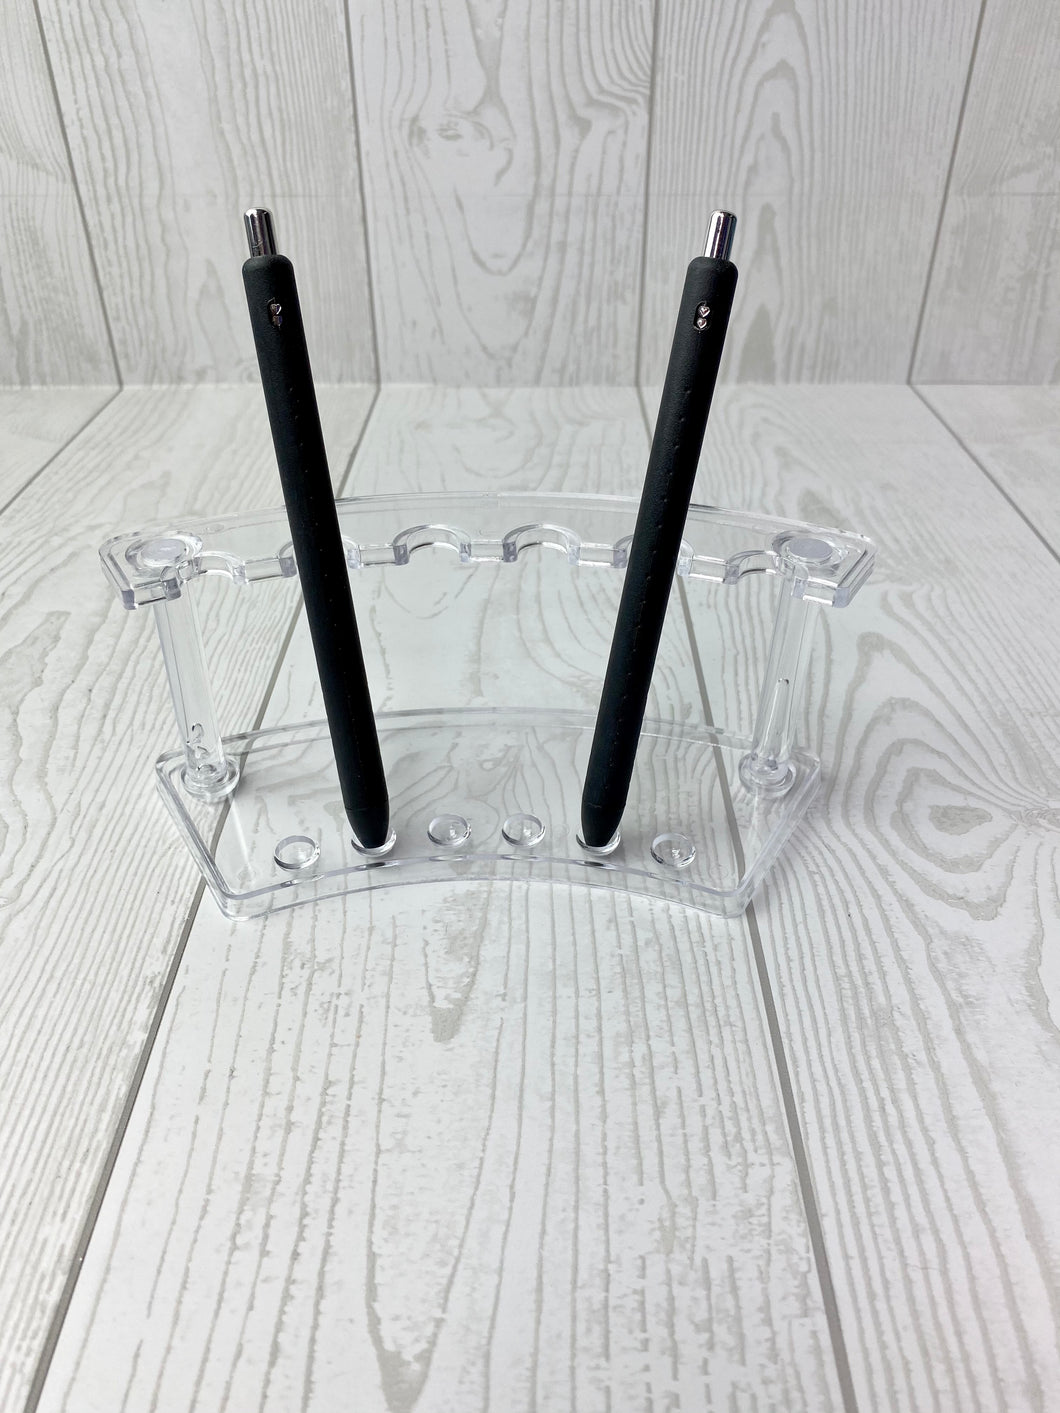 Glitter Pen Stand - Clear - Holds 6 Pens